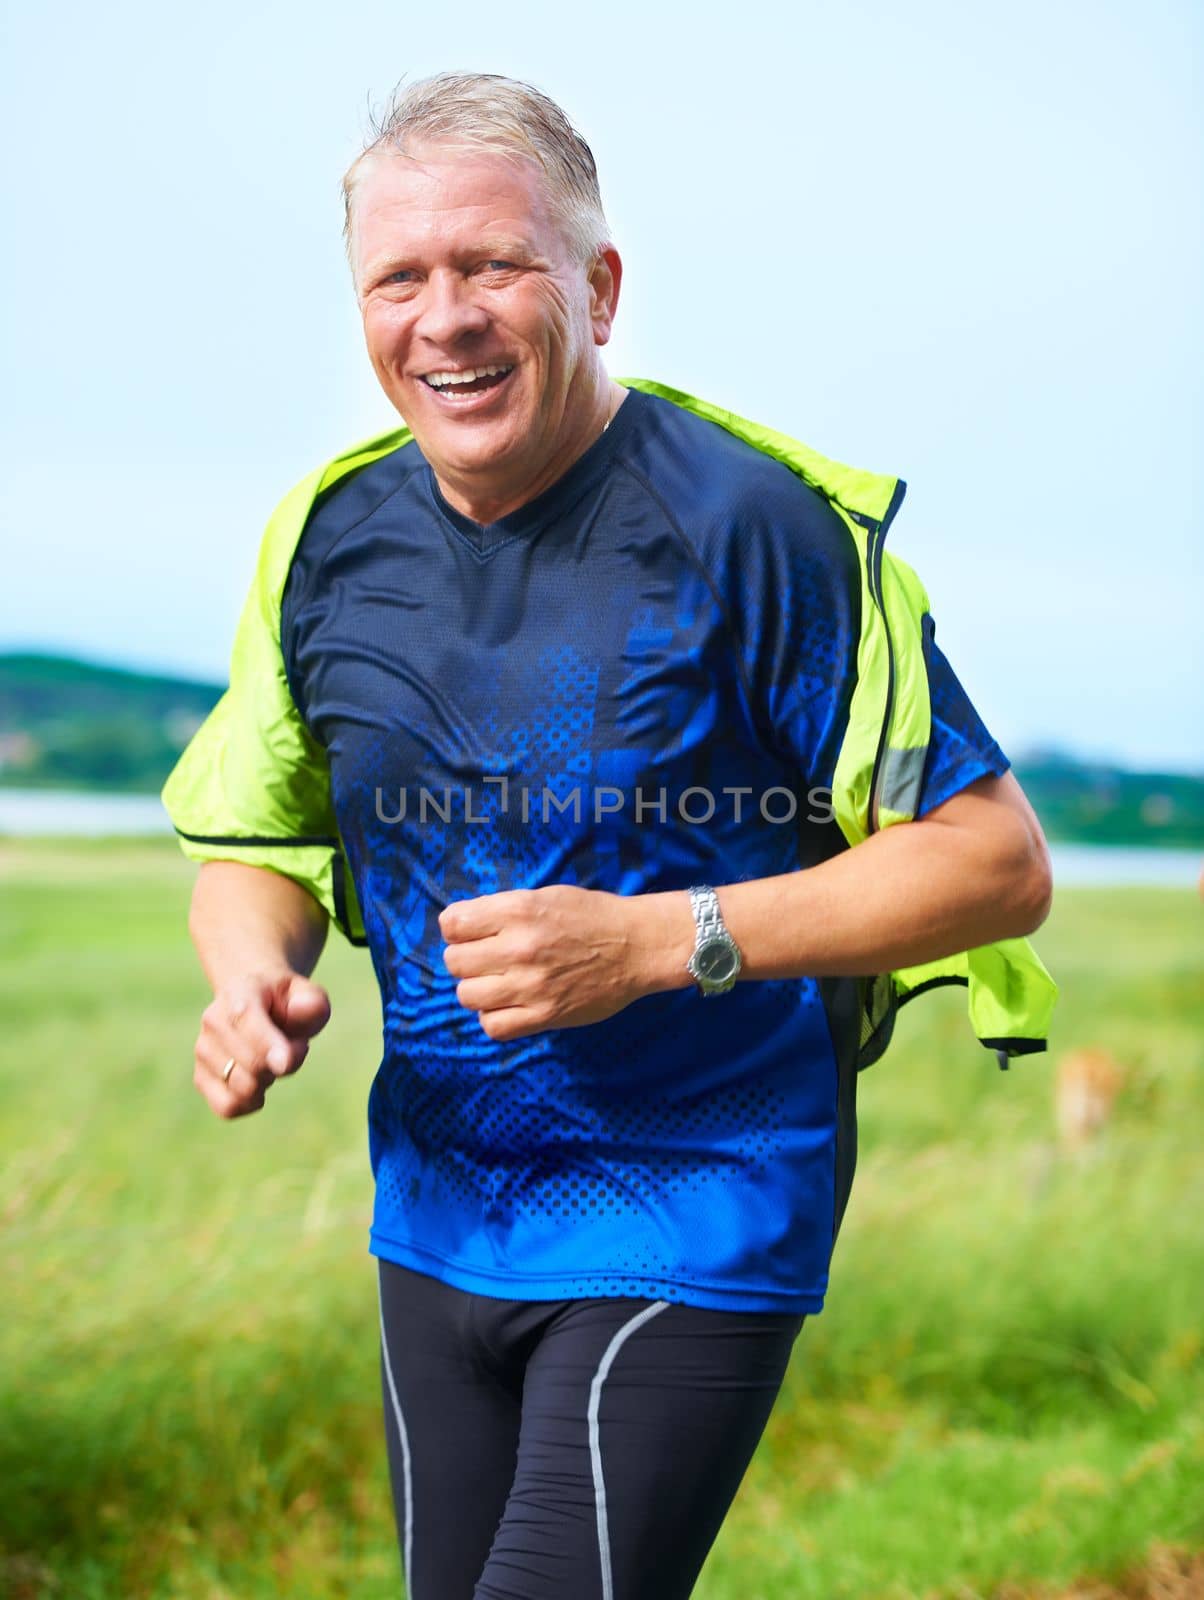 Us seniors need to keep in shape. Portrait of a senior man running outdoors